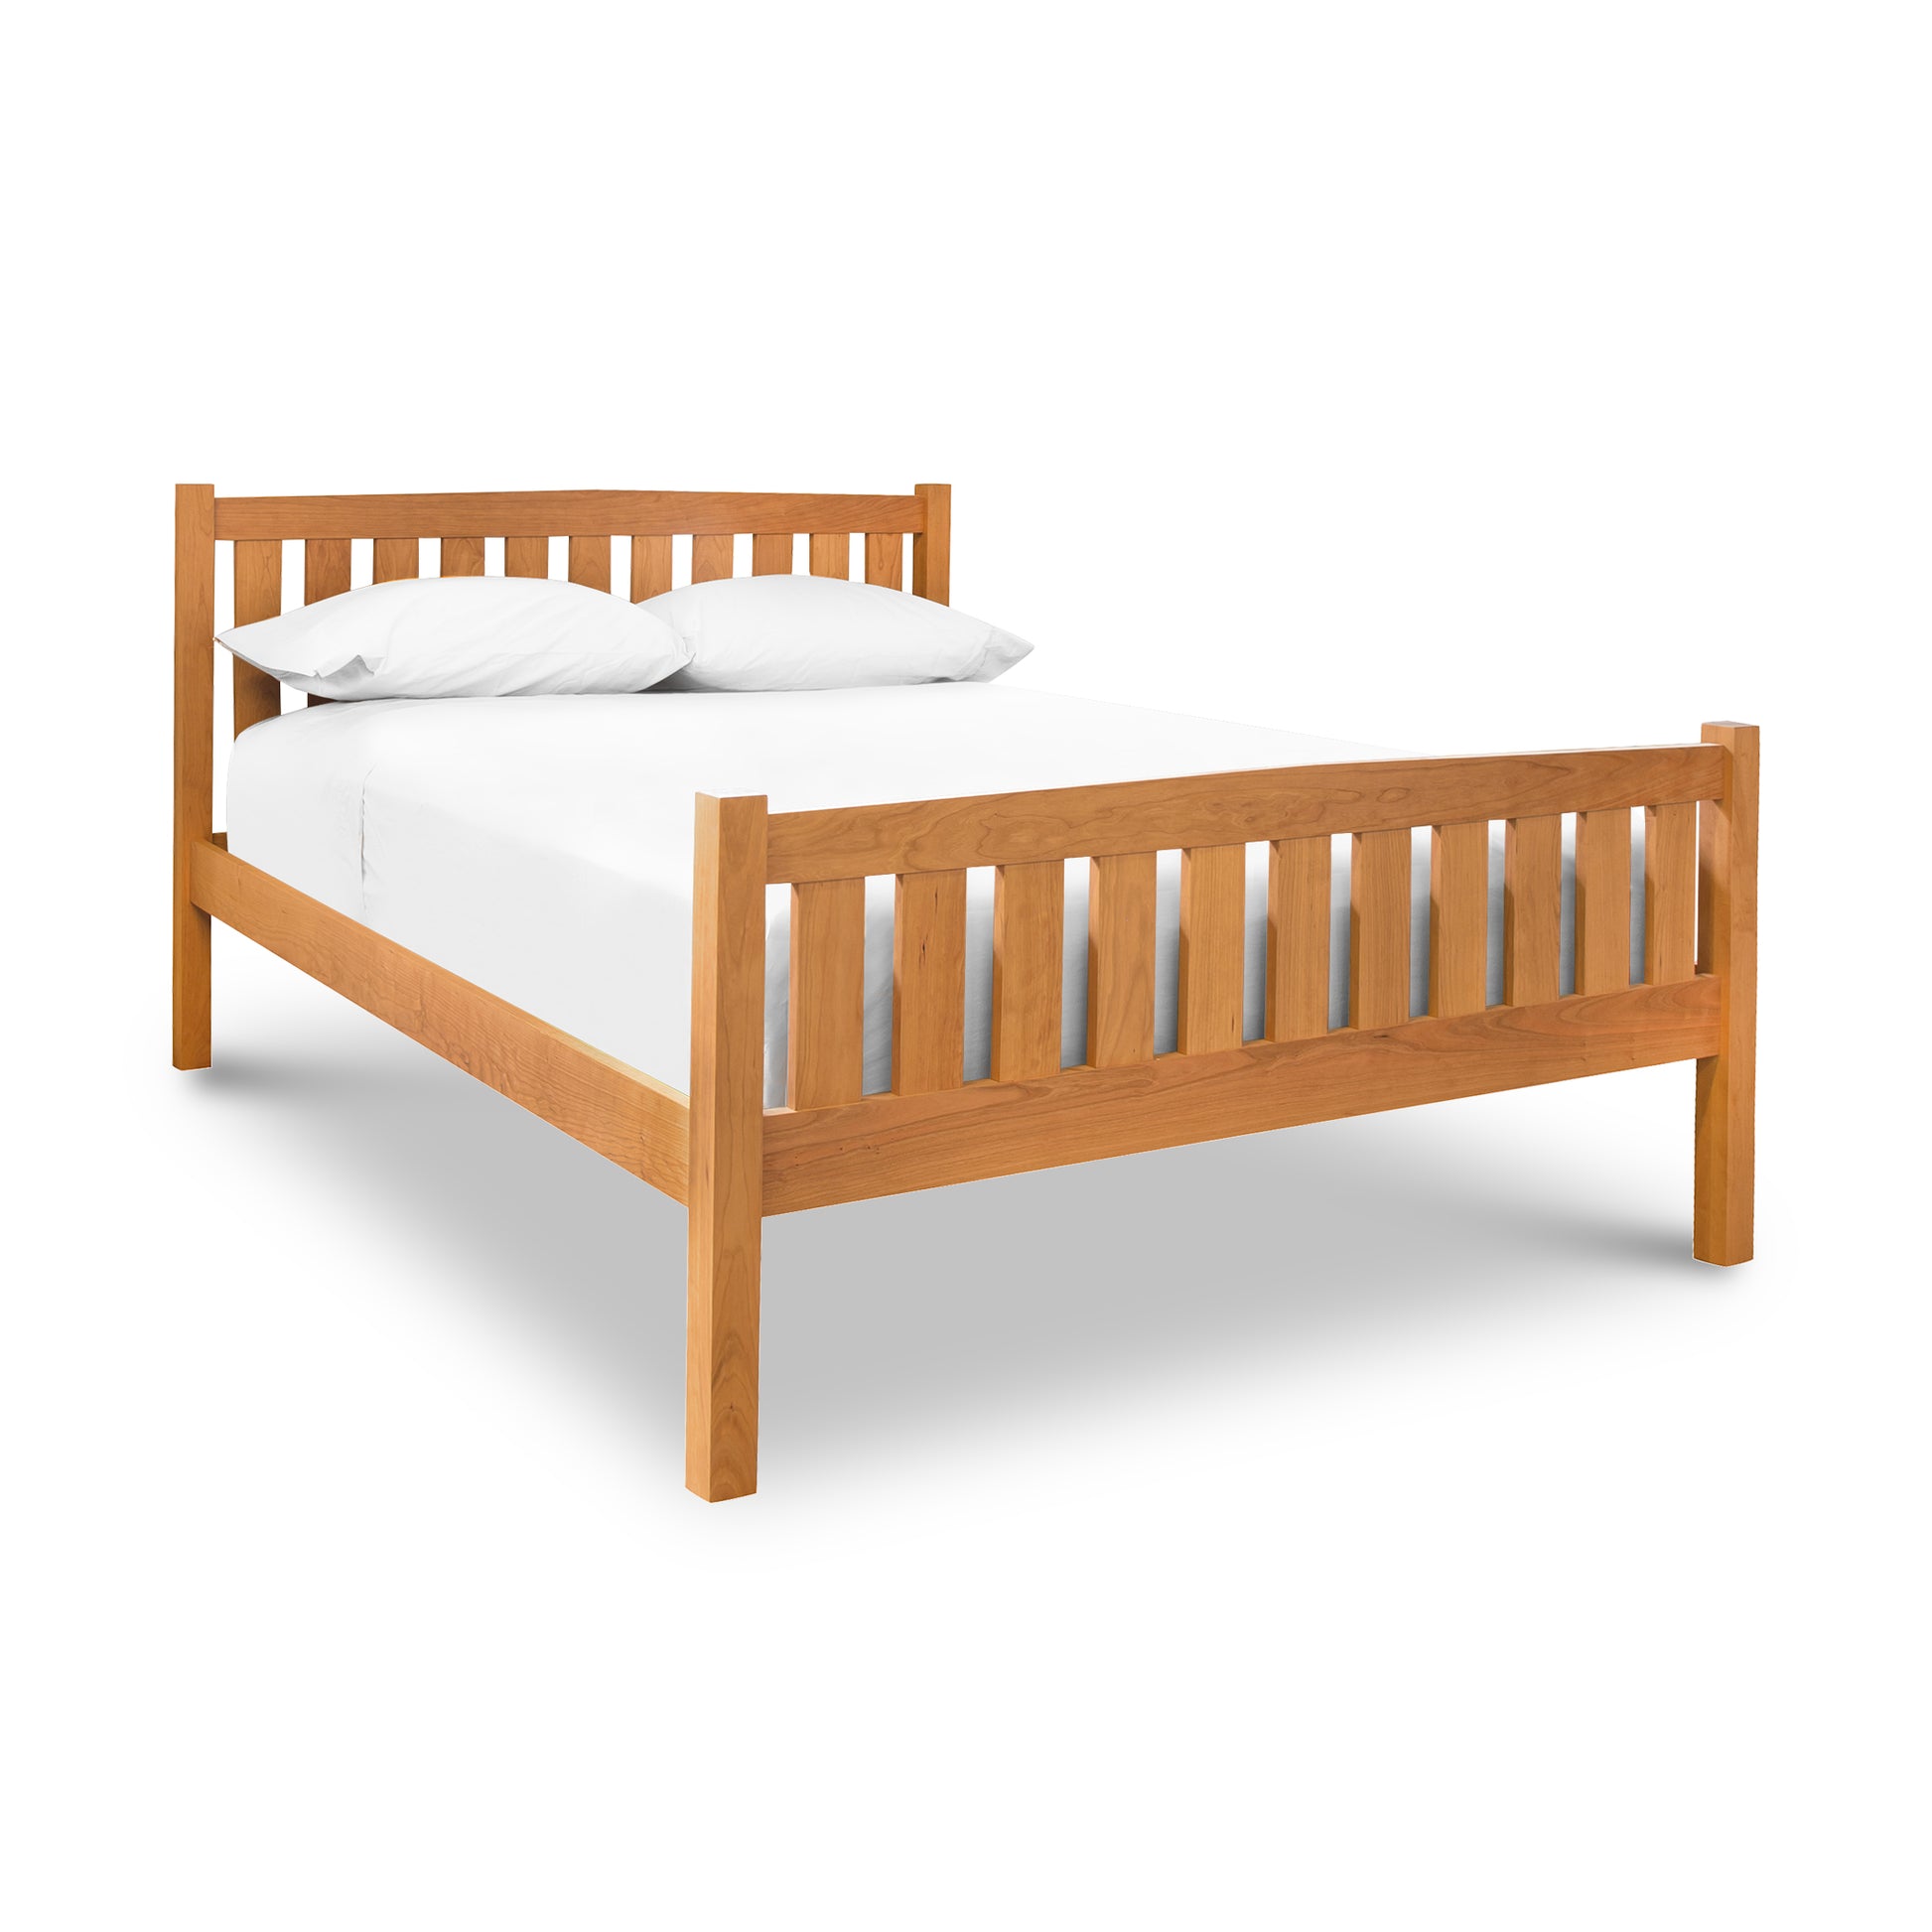 A Bennington Bed with High Footboard by Vermont Furniture Designs with a white sheet and two pillows, isolated on a white background.